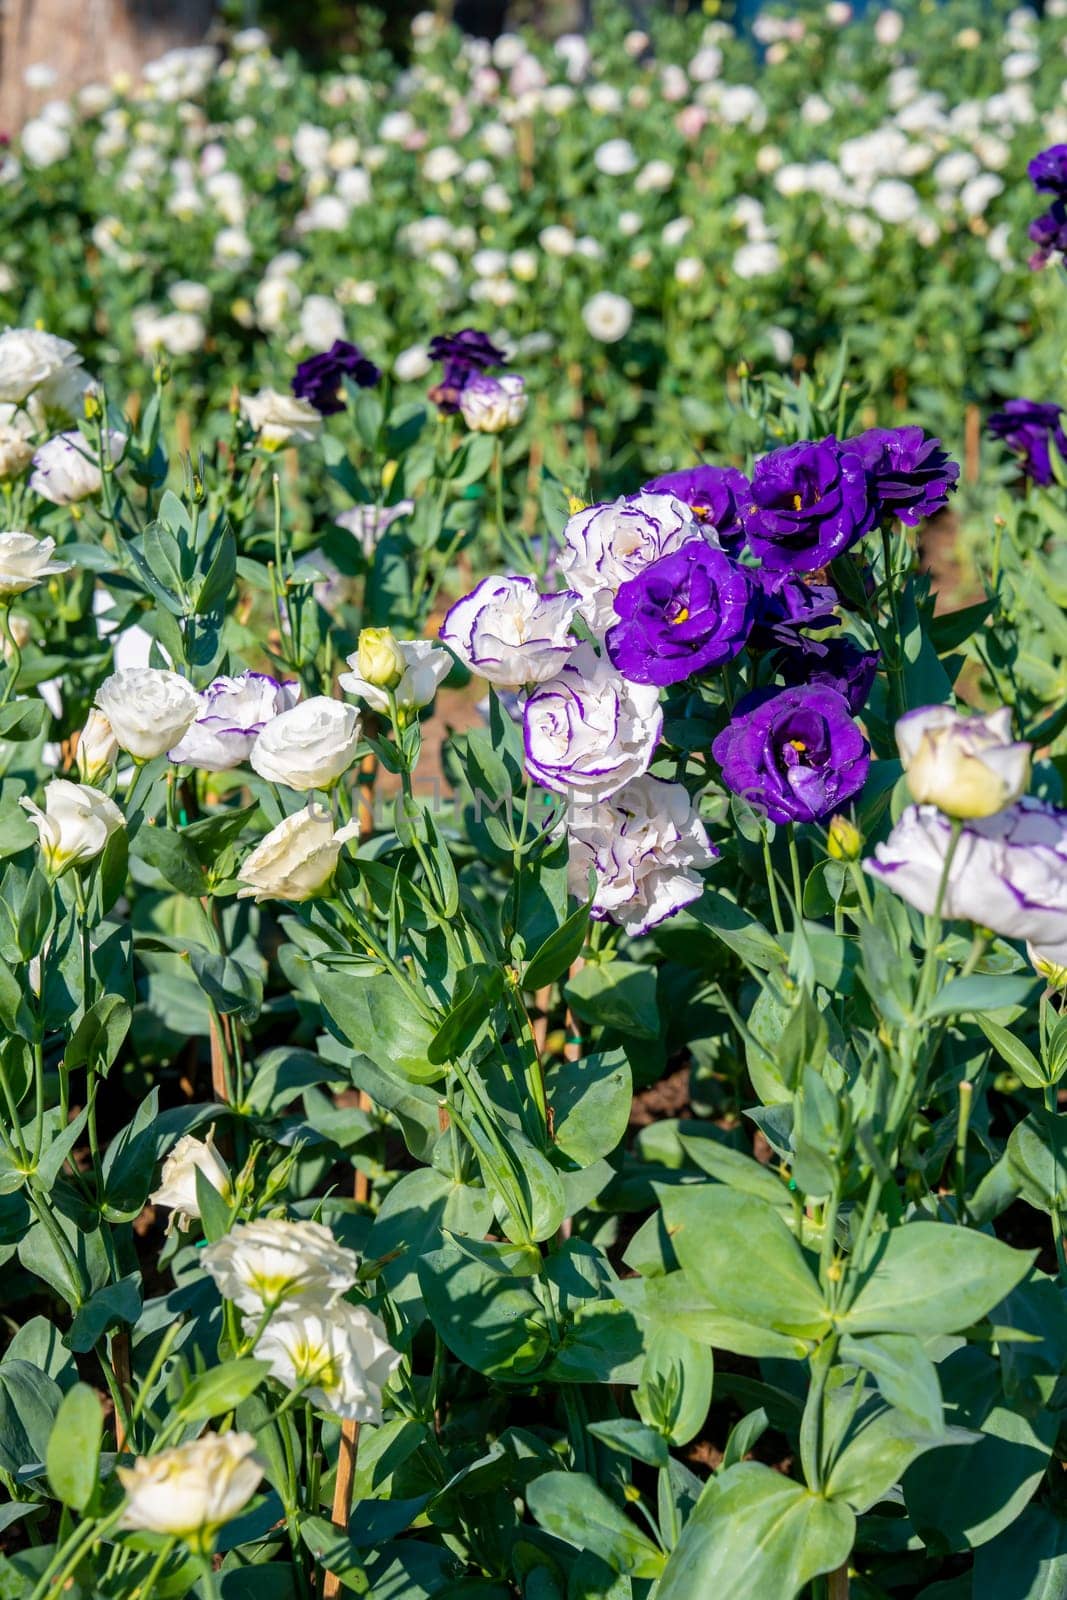 The Lisianthus flowers or Eustoma plants blossom in flower garden. by Gamjai